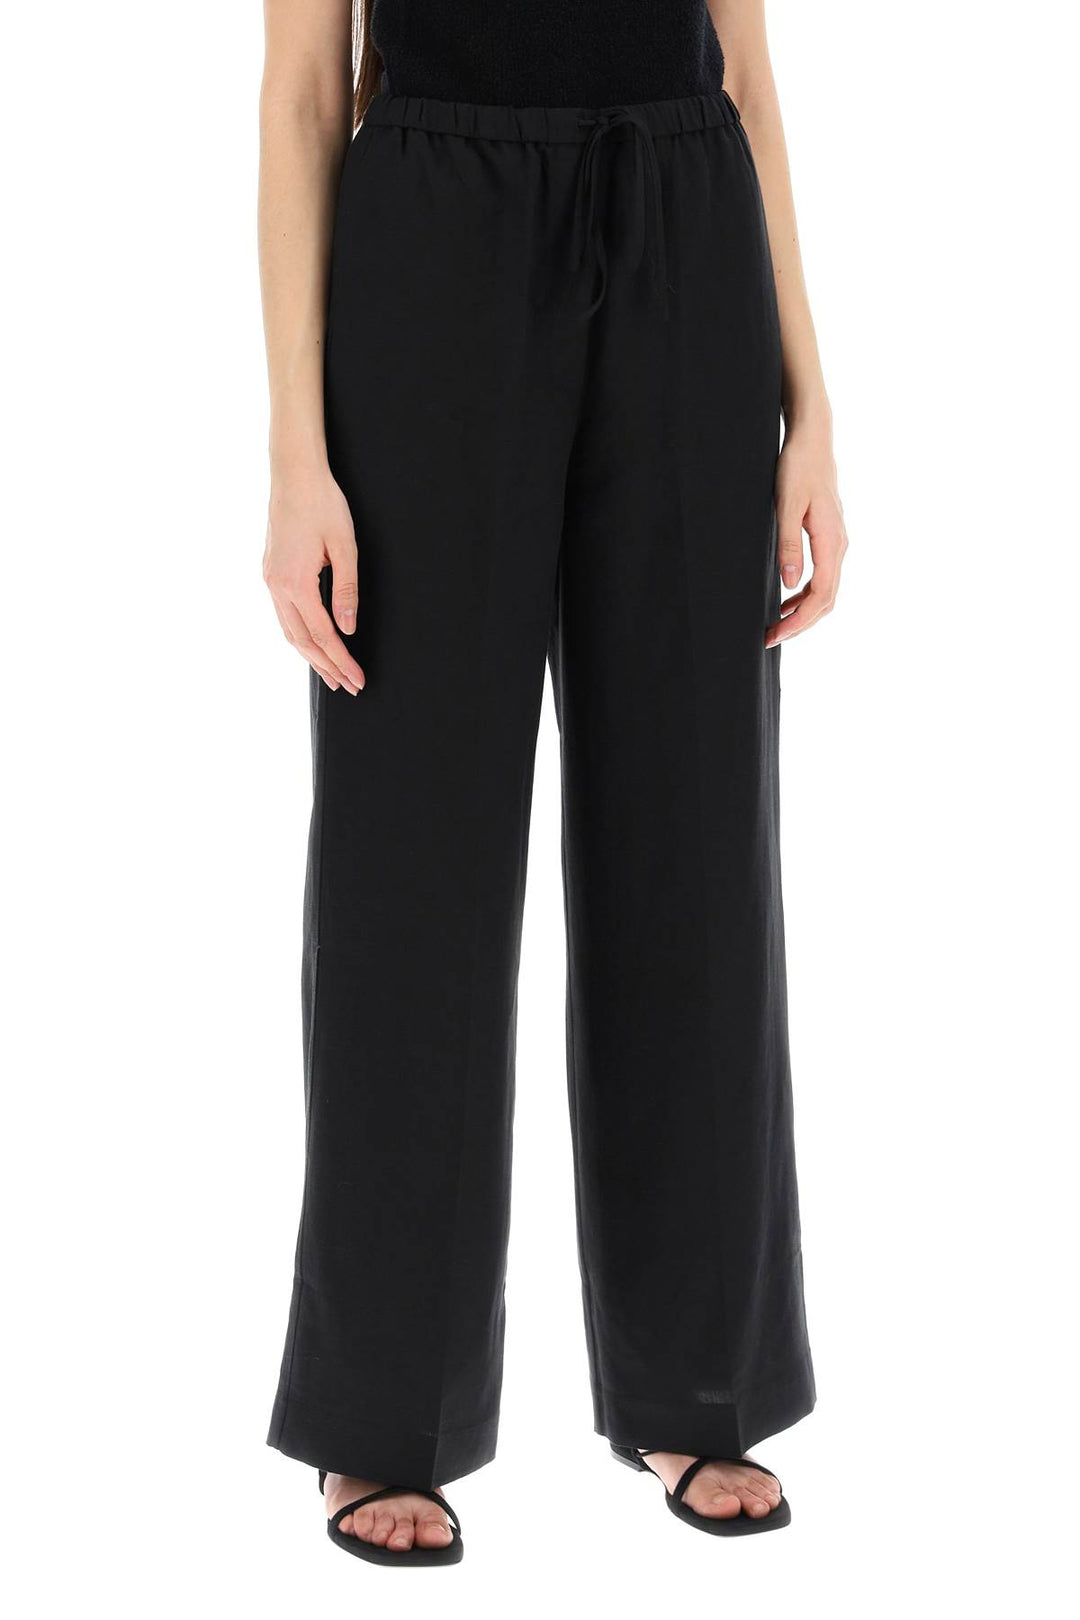 Toteme Lightweight Linen And Viscose Trousers   Nero